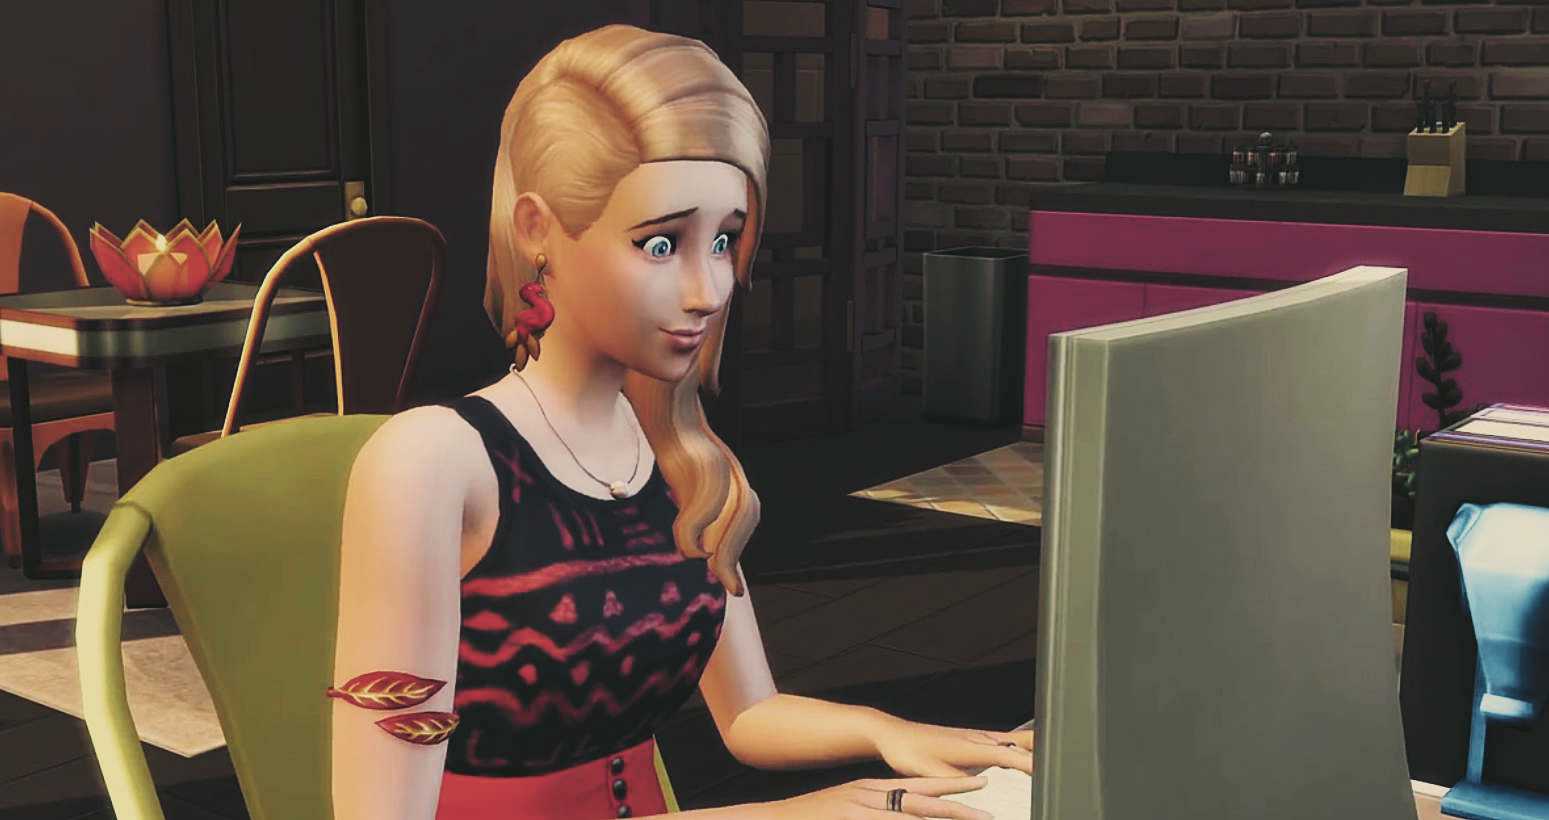 Sims 4 Official Patch Notes: Update details for 24 and 28 May 2022